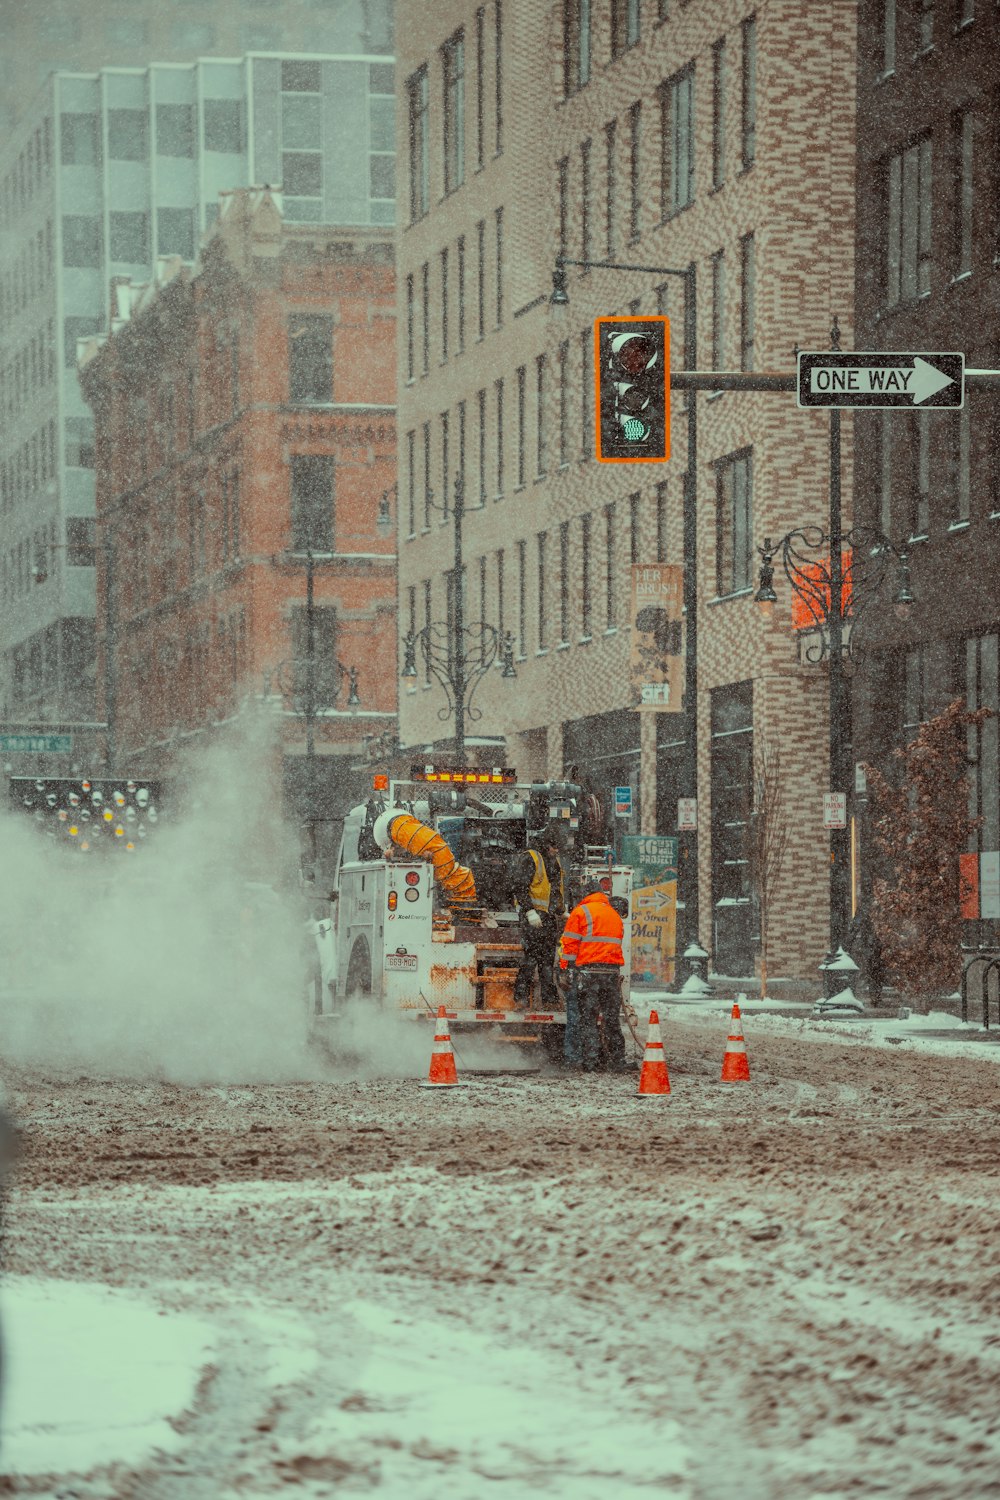 a street scene with a snow plow and traffic lights